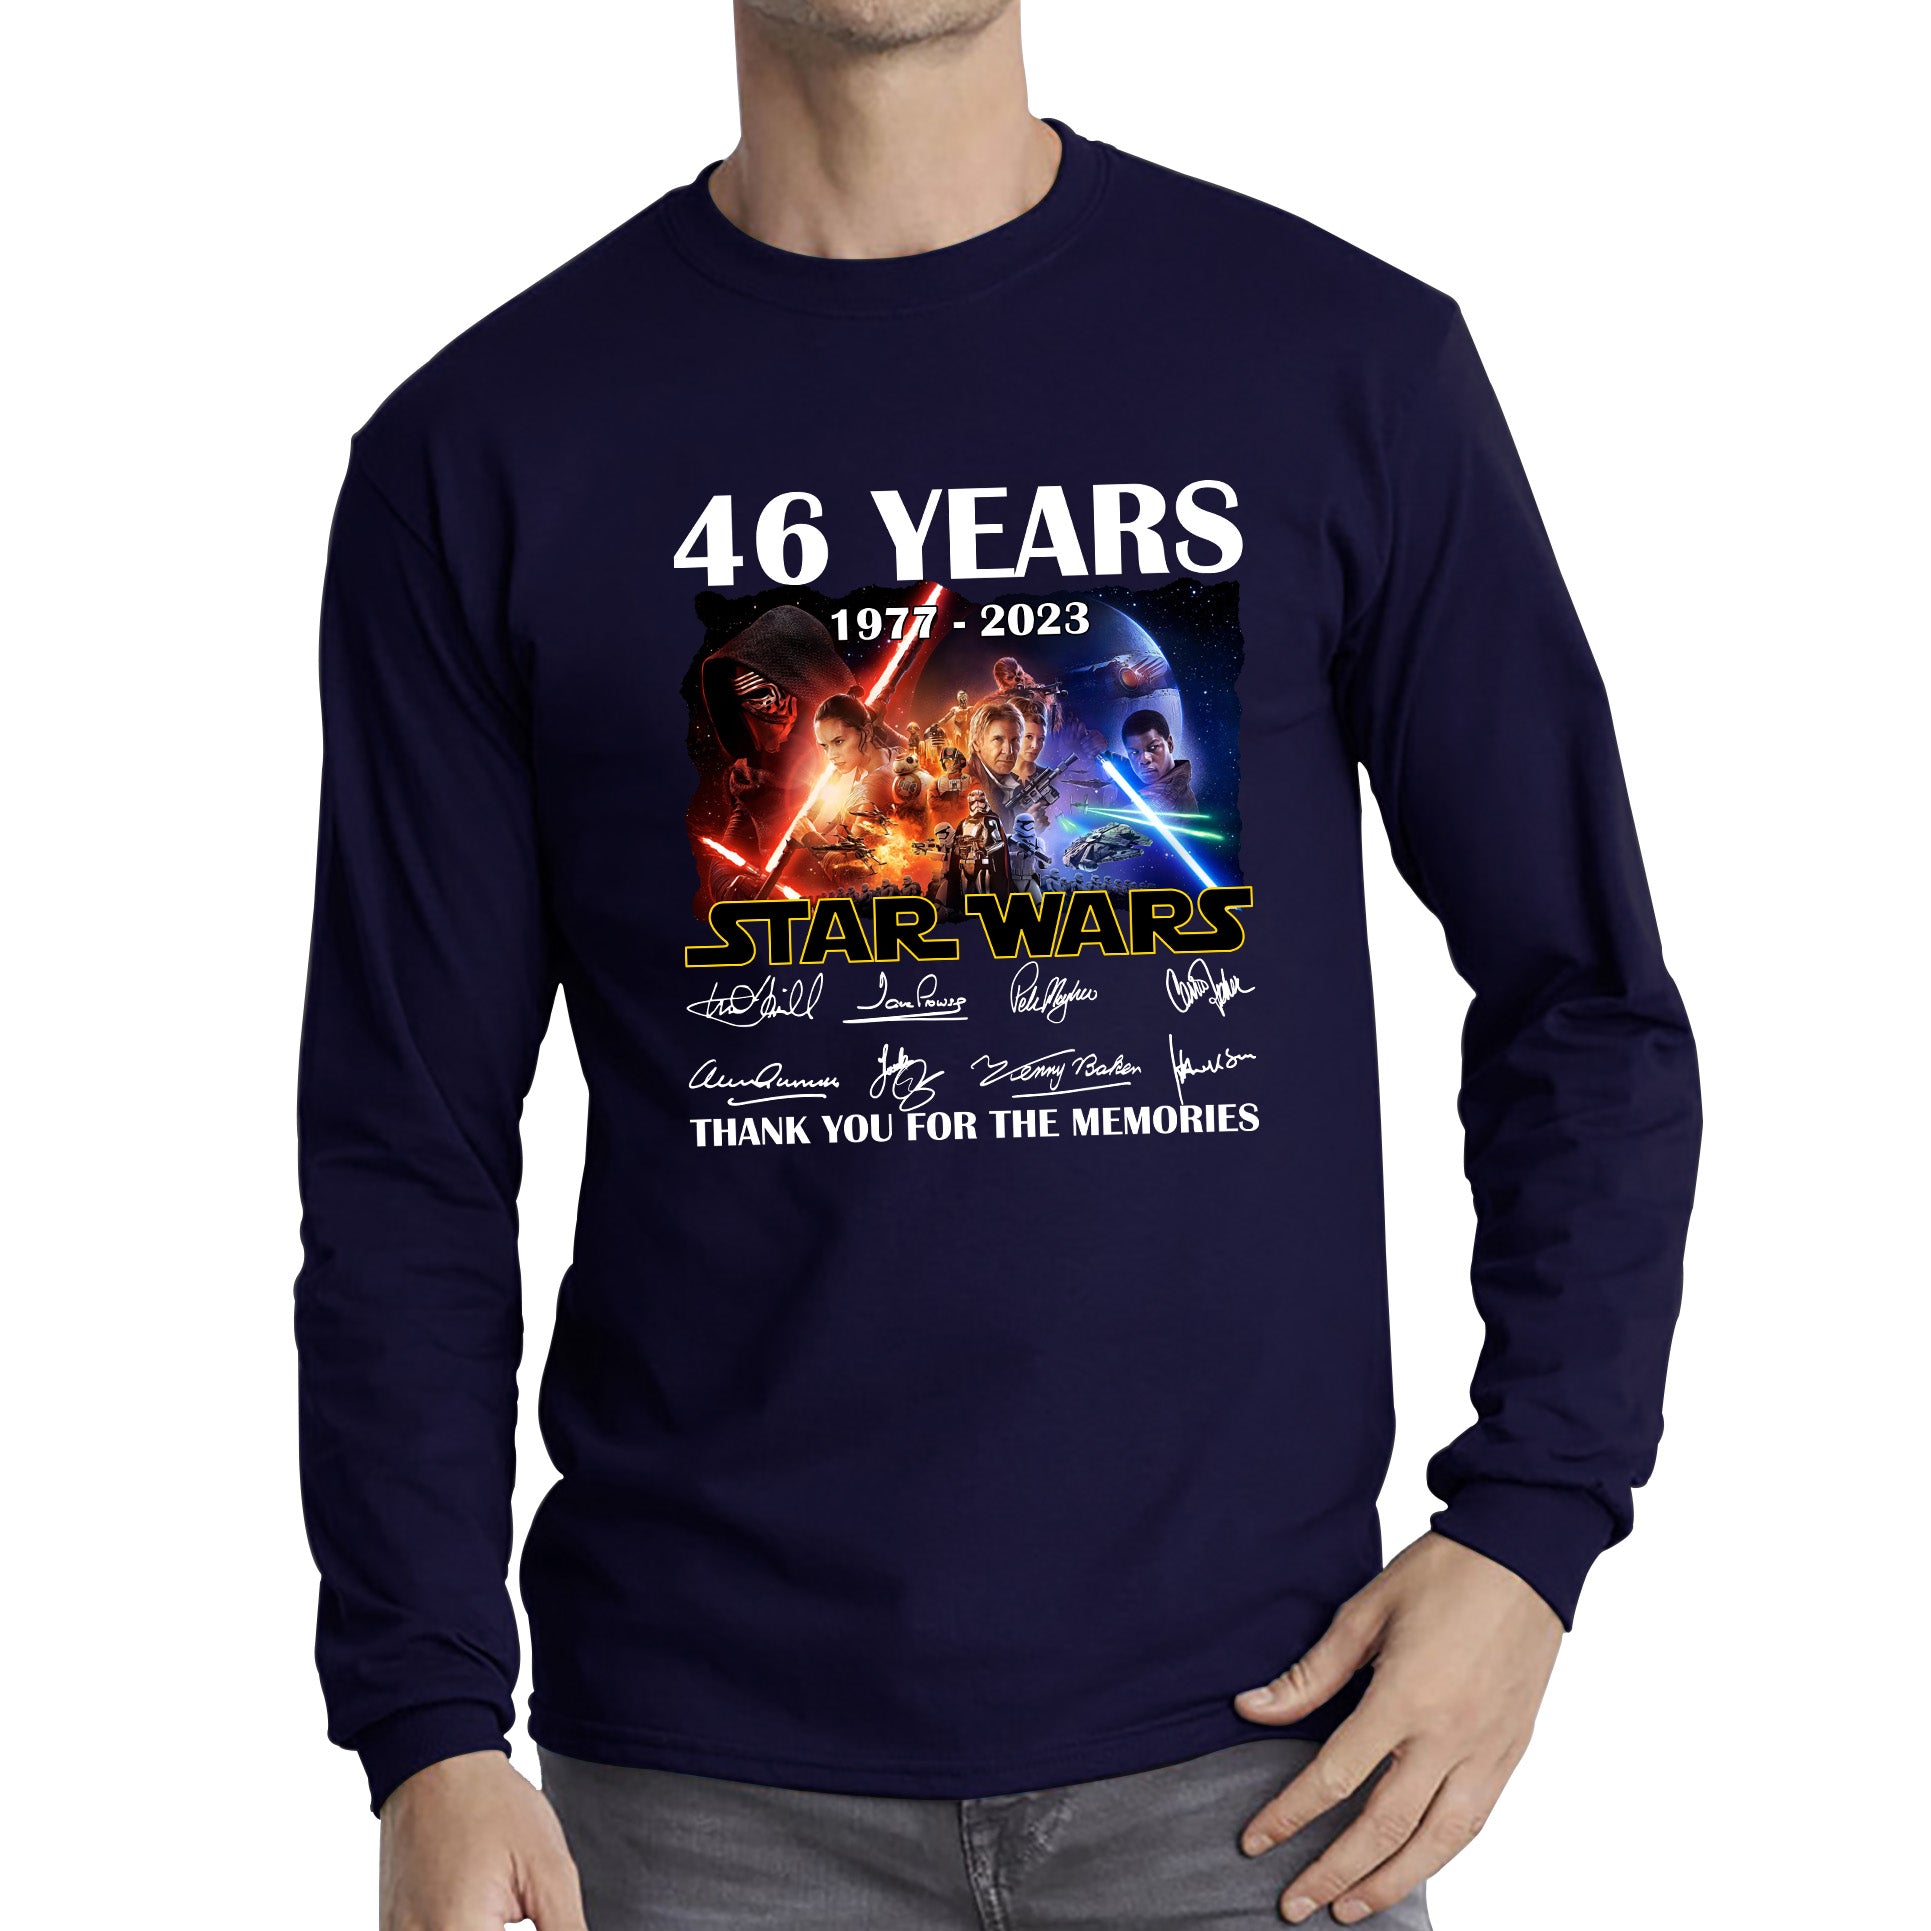 Disney Star Wars Day 46th Anniversary 1977-2023 The Force Awakens Characters Signatures Thank You For The Memories Long Sleeve T Shirt